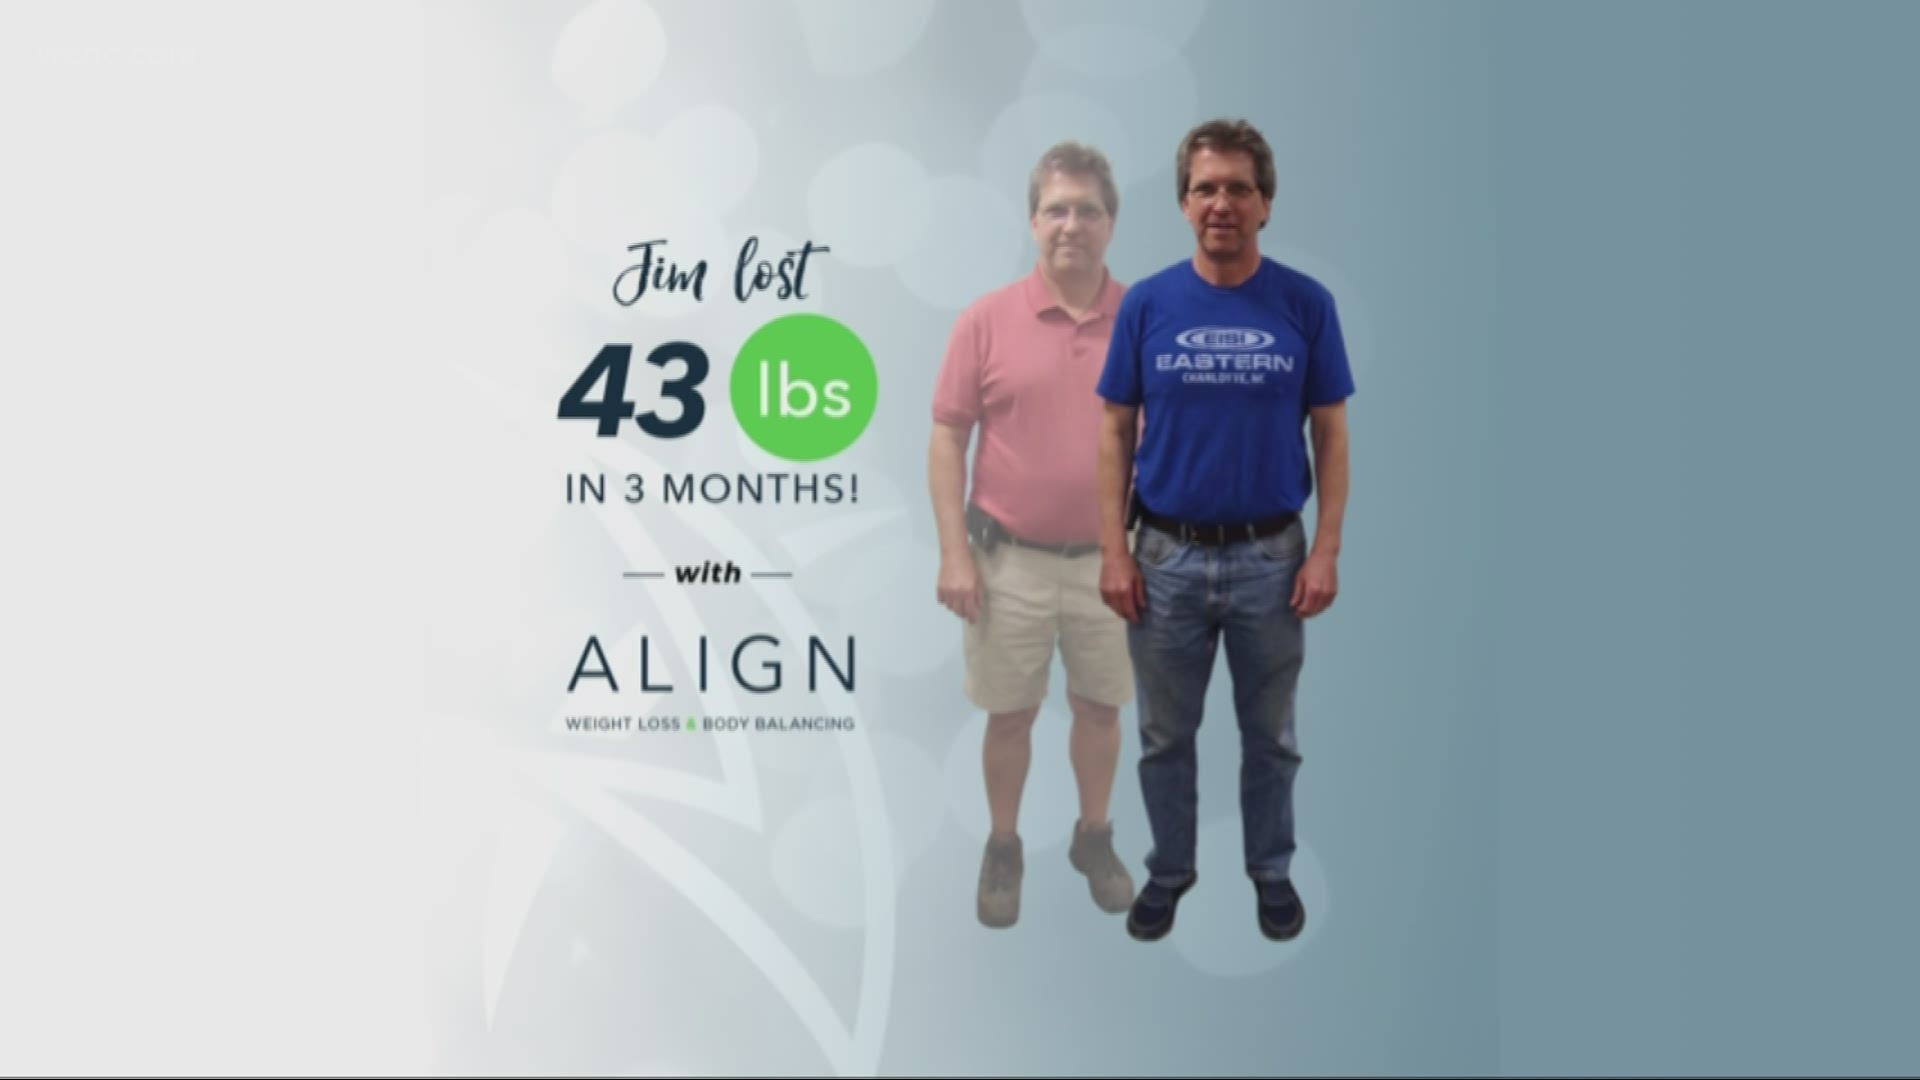 Align Weight Loss offers effective weight loss programs that improve your overall health.